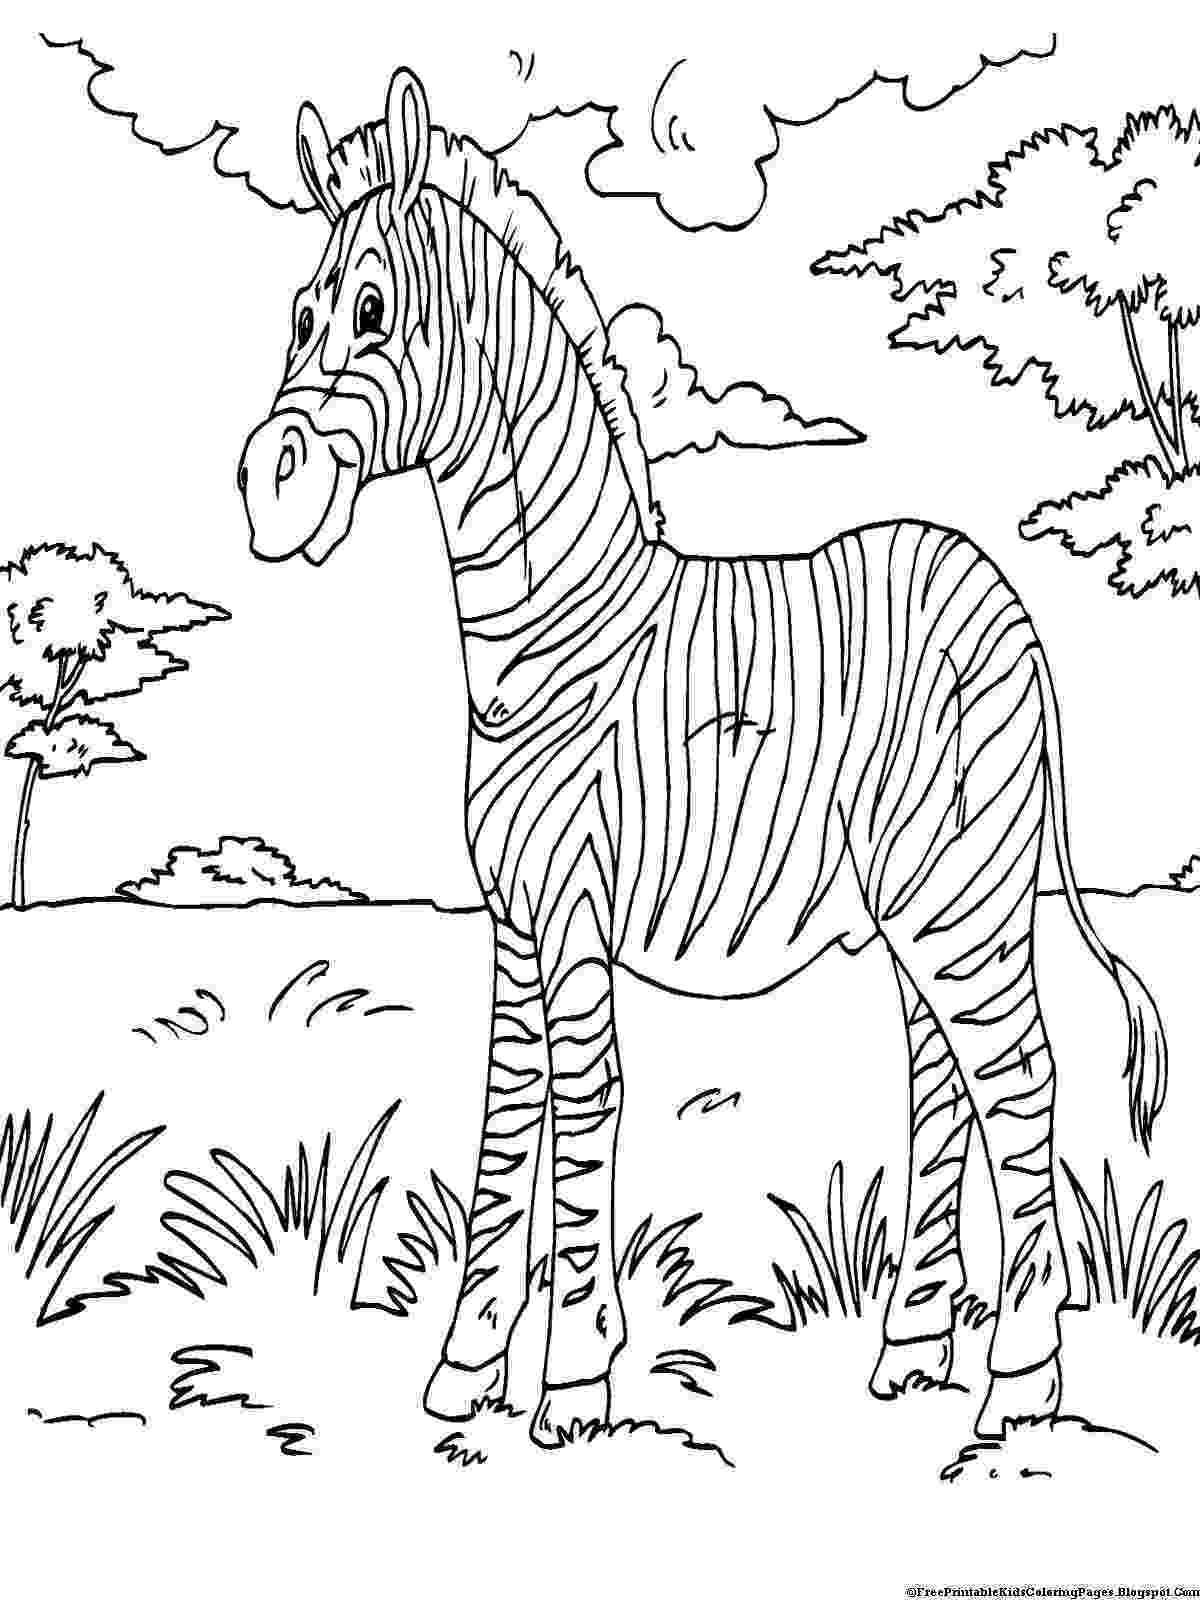 coloring pages of zebras free zebra coloring pages pages of coloring zebras 